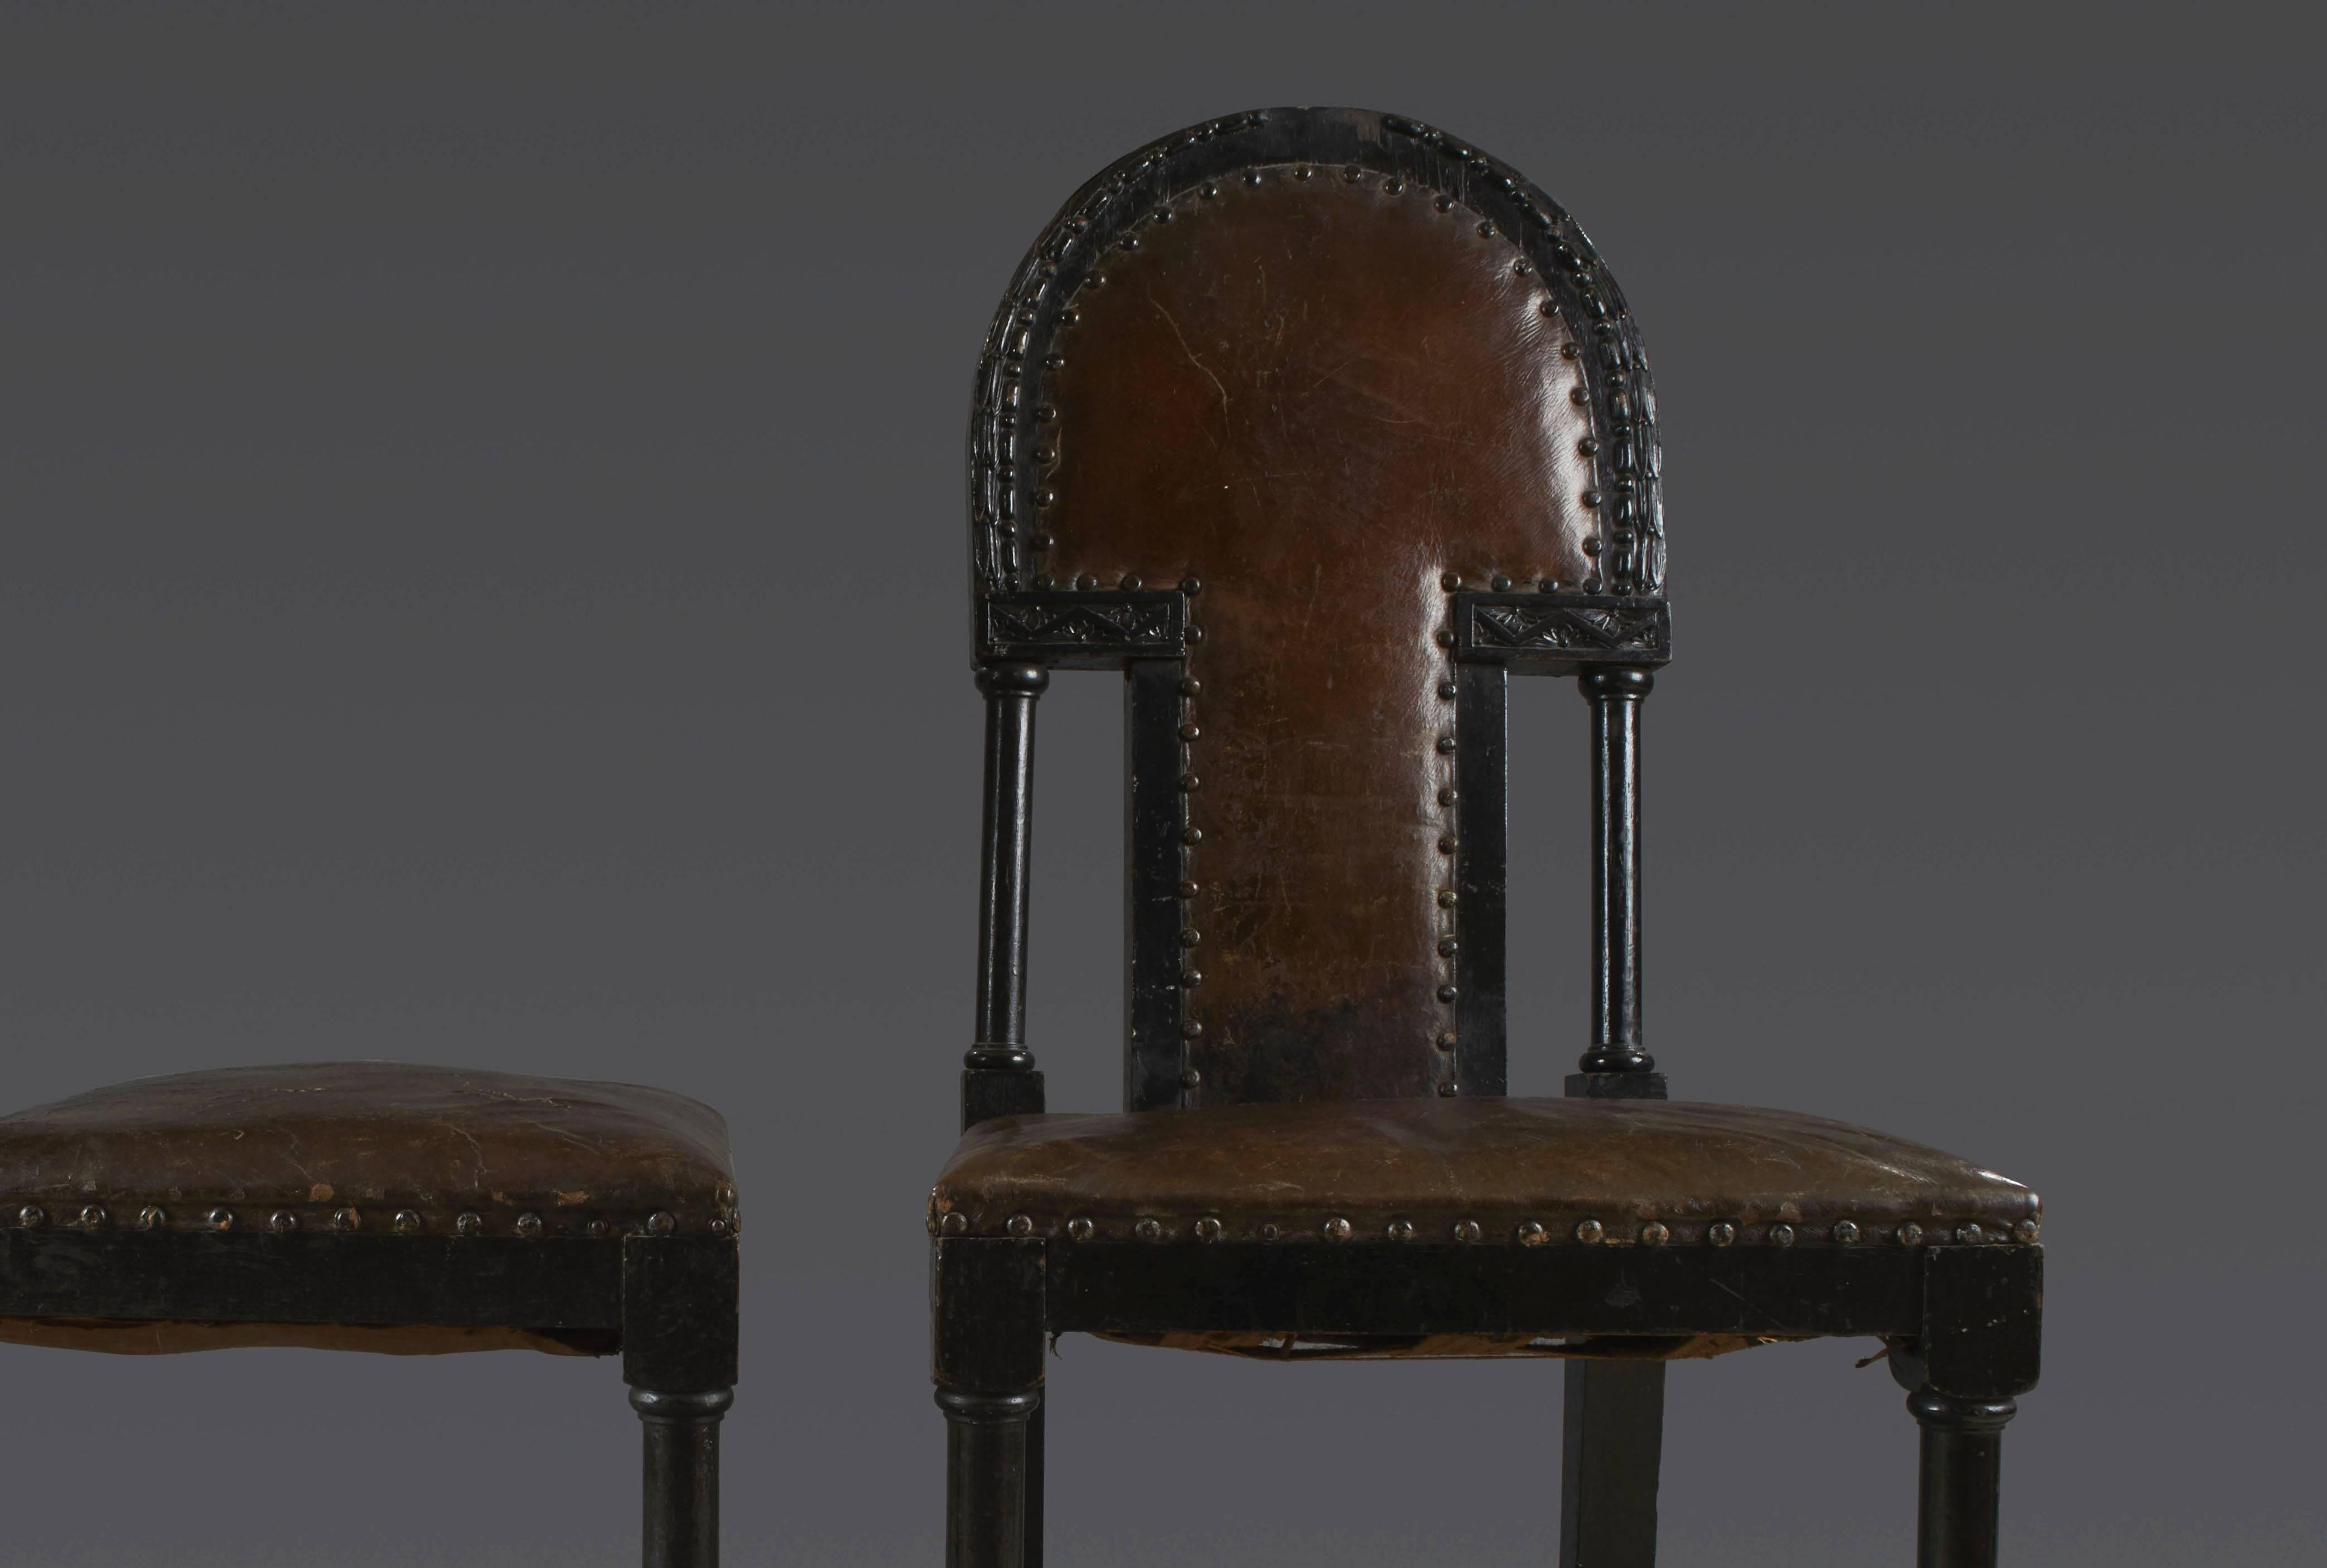 Set of six chairs in darken wood and studded brown leather - arched back with small columns decorated with bay leaves friezes, pearls and two small lintels with foliage motif, turned legs joined up with brace, Vienna 1920 Post Secession. Dimension: